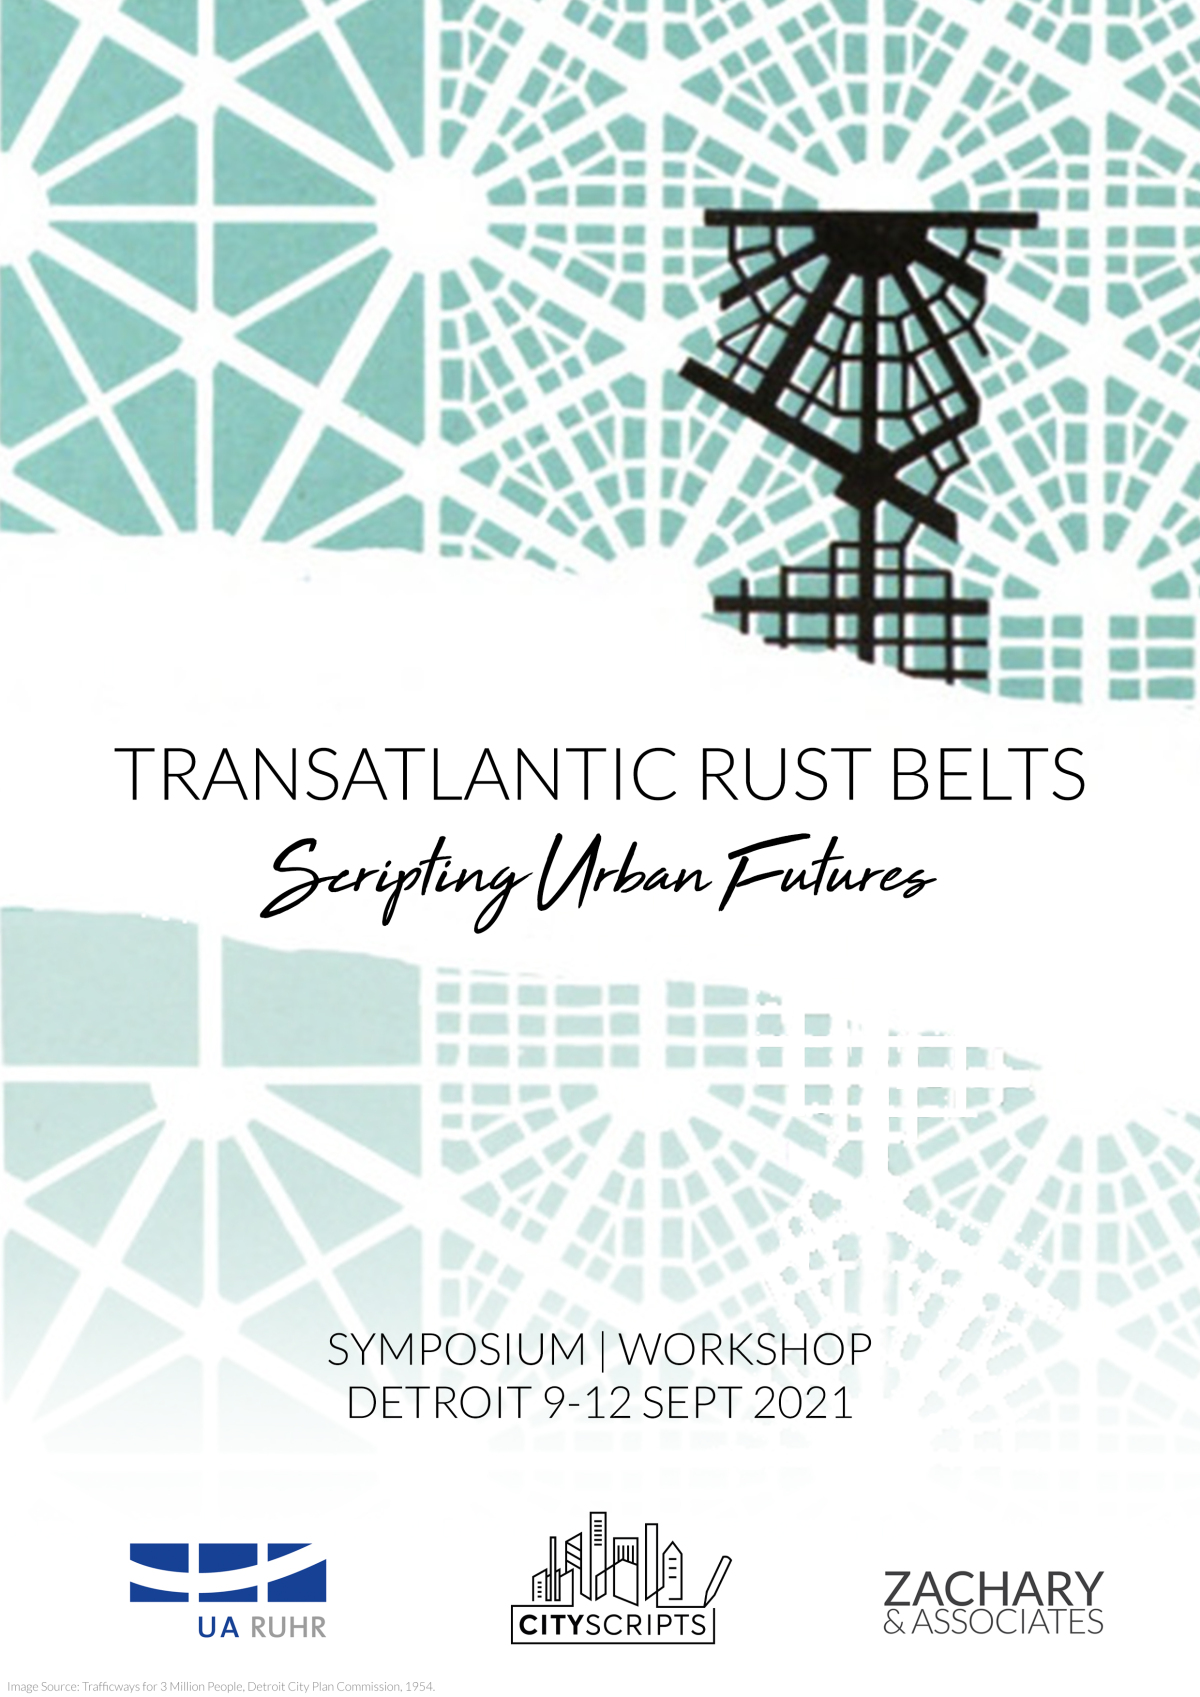 Poster for Symposium called Transatlantic Rust Belts - Scripting Urban Futures. The poster shows triangular and hexagonal shapes that make up the streets of Detroit.a building plan of the city of Detroit from 1954 which mostly 